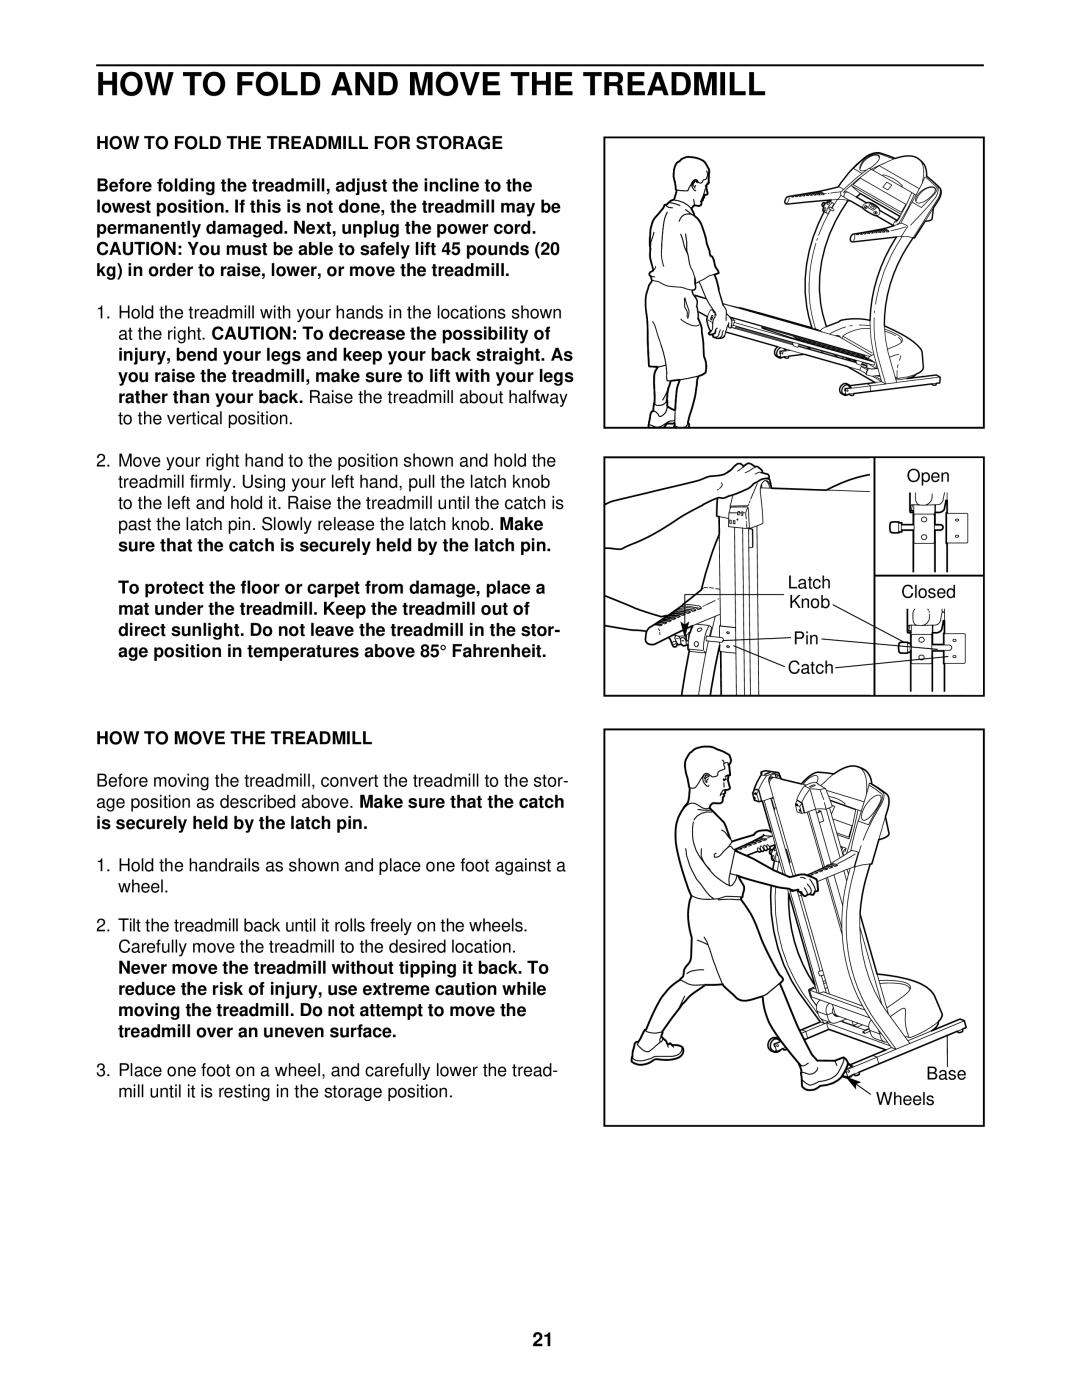 ProForm PFTL69213 HOW to Fold and Move the Treadmill, HOW to Fold the Treadmill for Storage, HOW to Move the Treadmill 